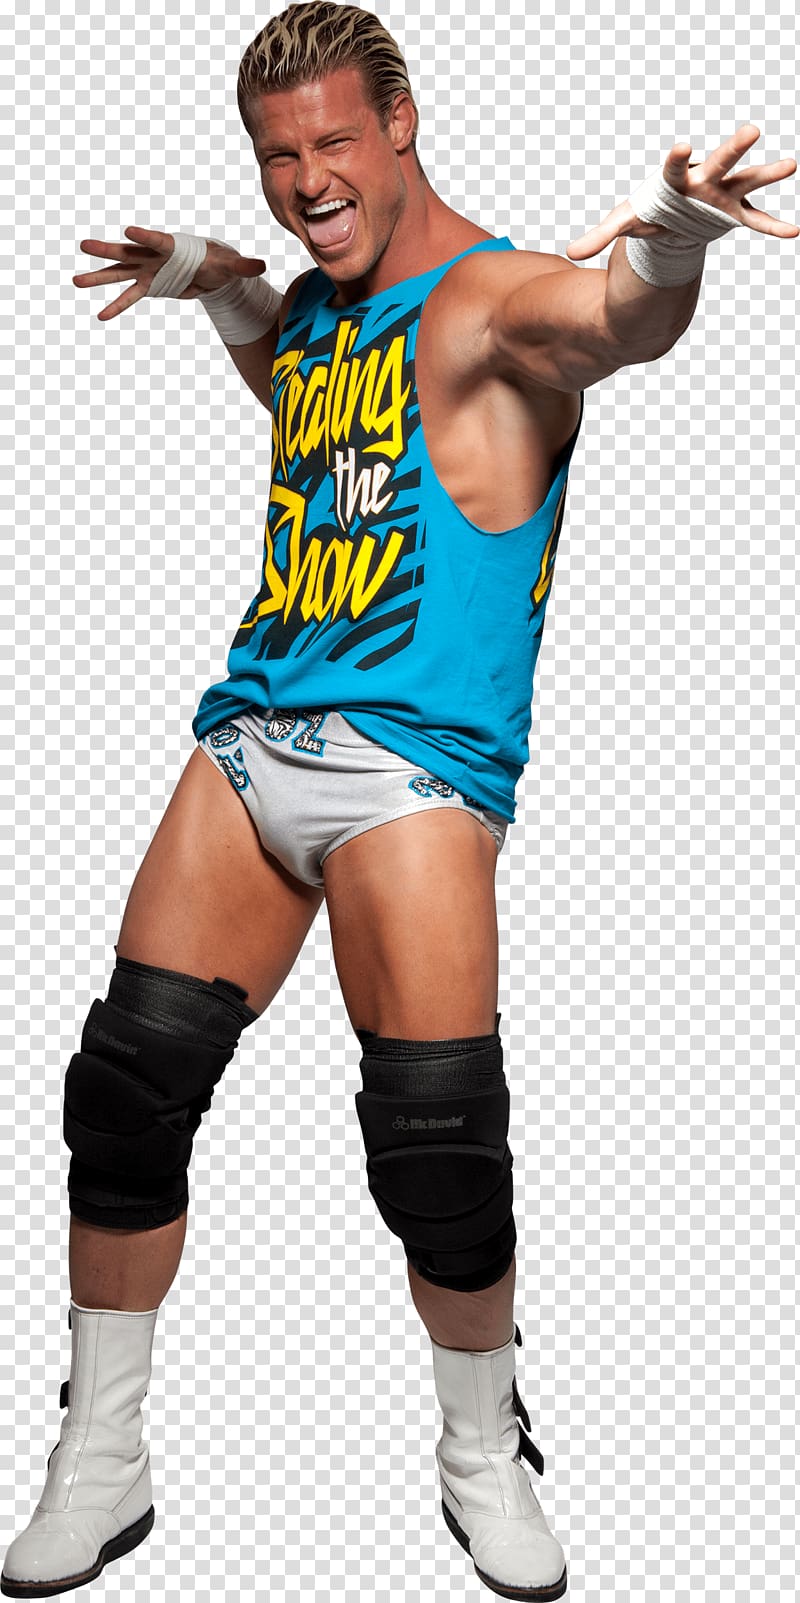 man wearing blue and yellow tank top and pair of black knee pads, Dolph Ziggler Dance transparent background PNG clipart